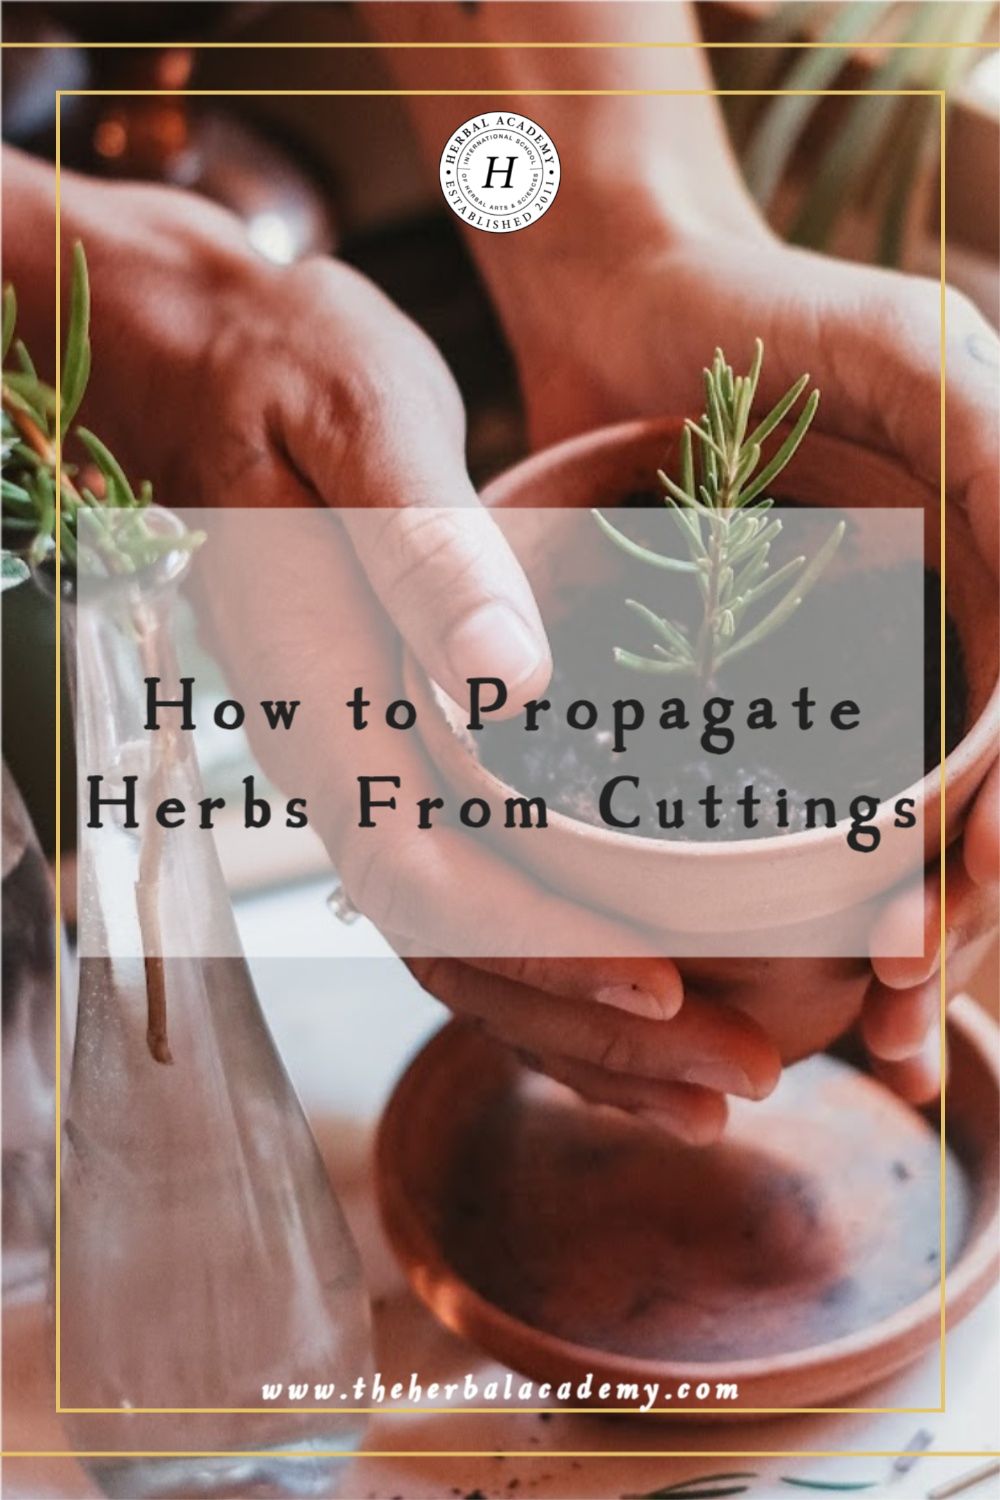 How to Propagate Herbs From Cuttings | Herbal Academy | There are ways to multiply herbs using your already-established plants. Here’s how to propagate herbs using plant stems.